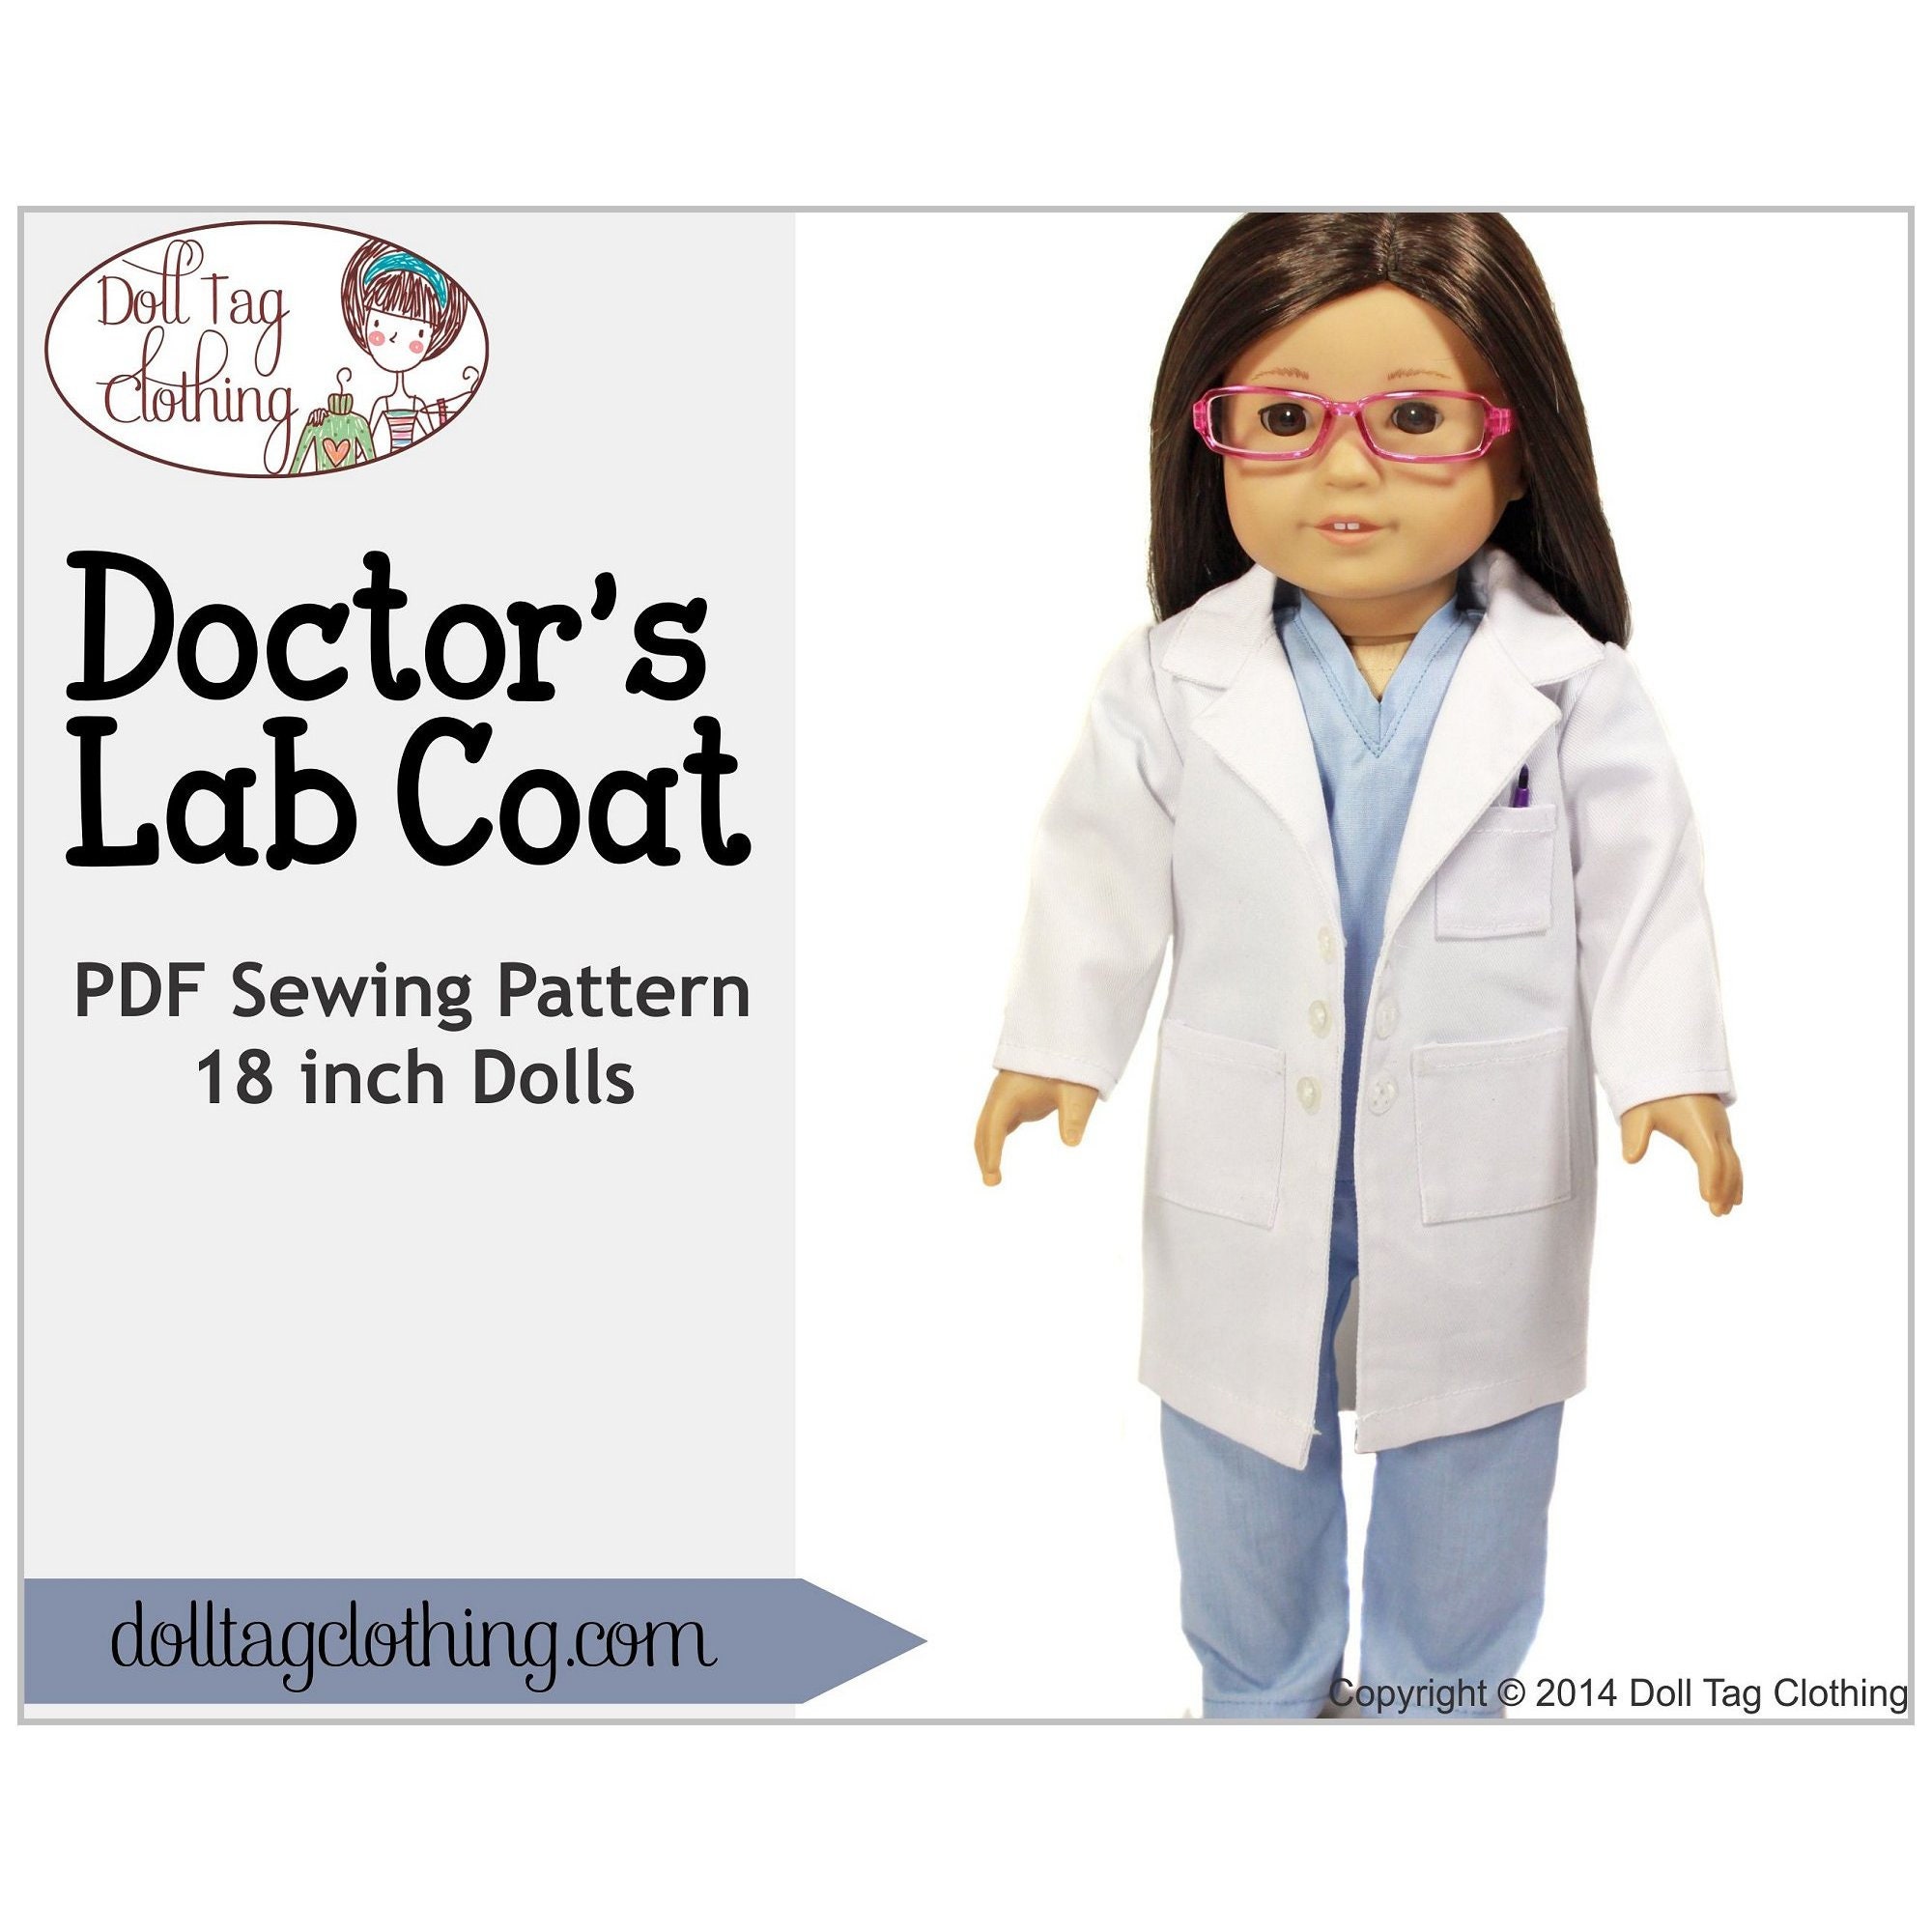 McCall's Patterns Summer 2020 – Doctor T Designs